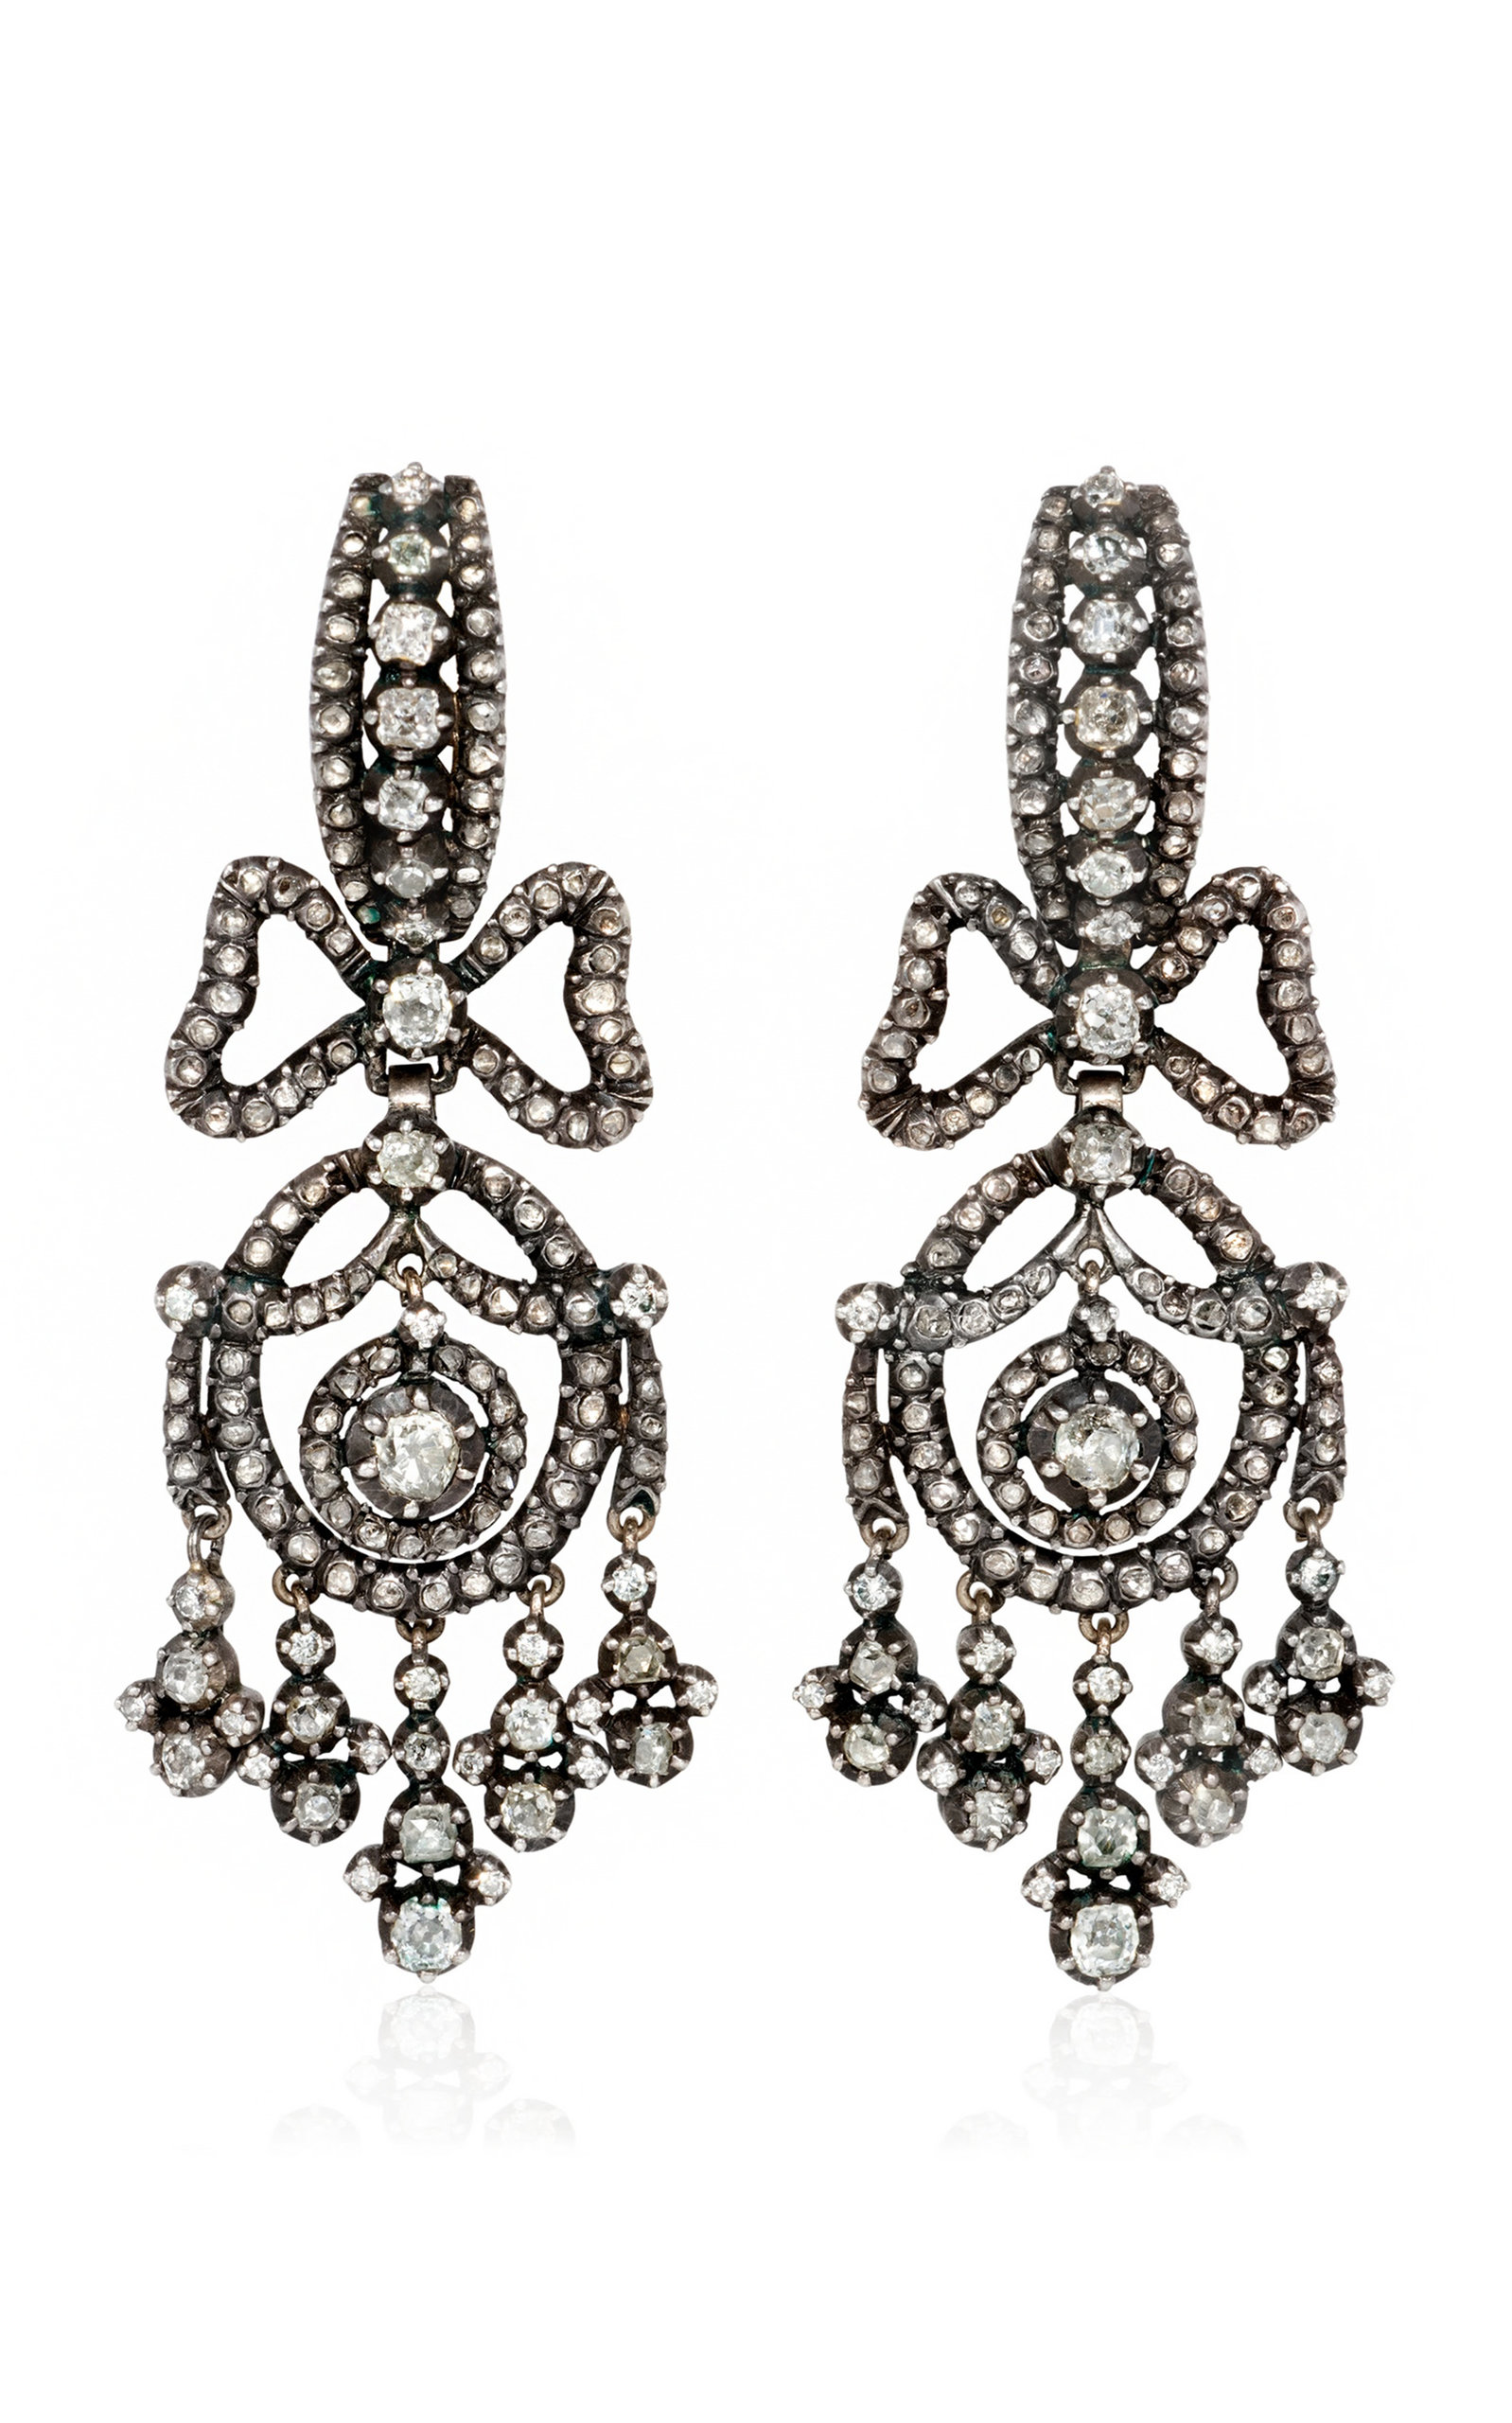 Kentshire - Women's One of a Kind Antique Style Rose Cut Diamond Earrings - White - Only At Moda Operandi